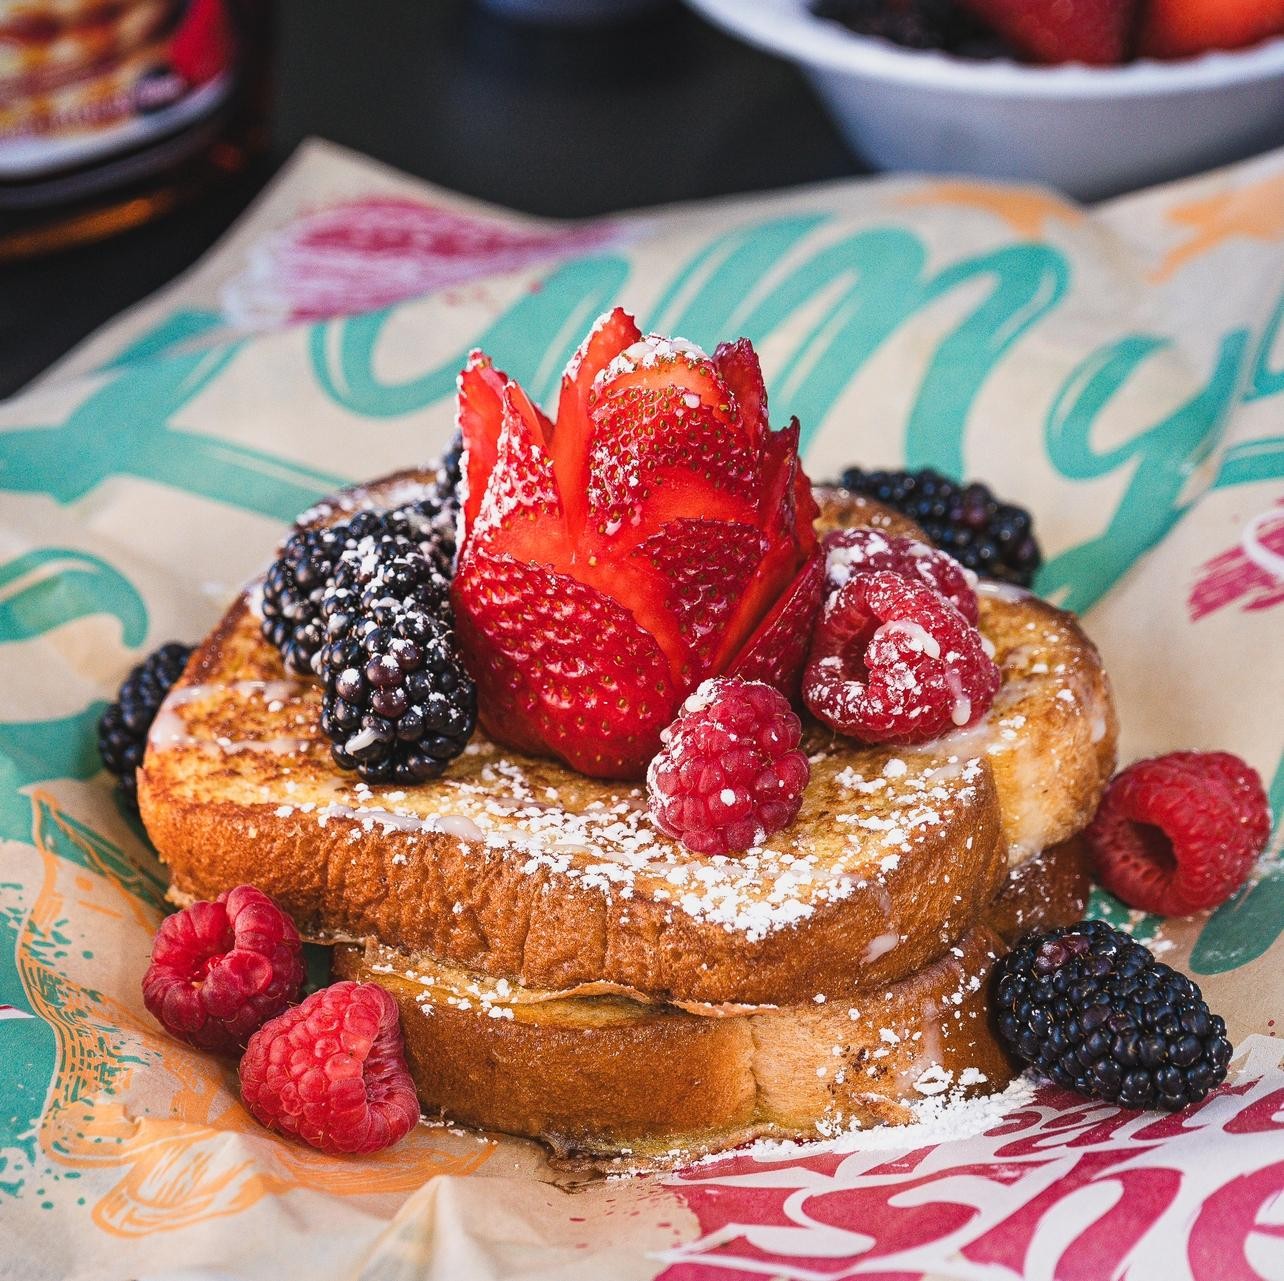 French Toast and Fruit